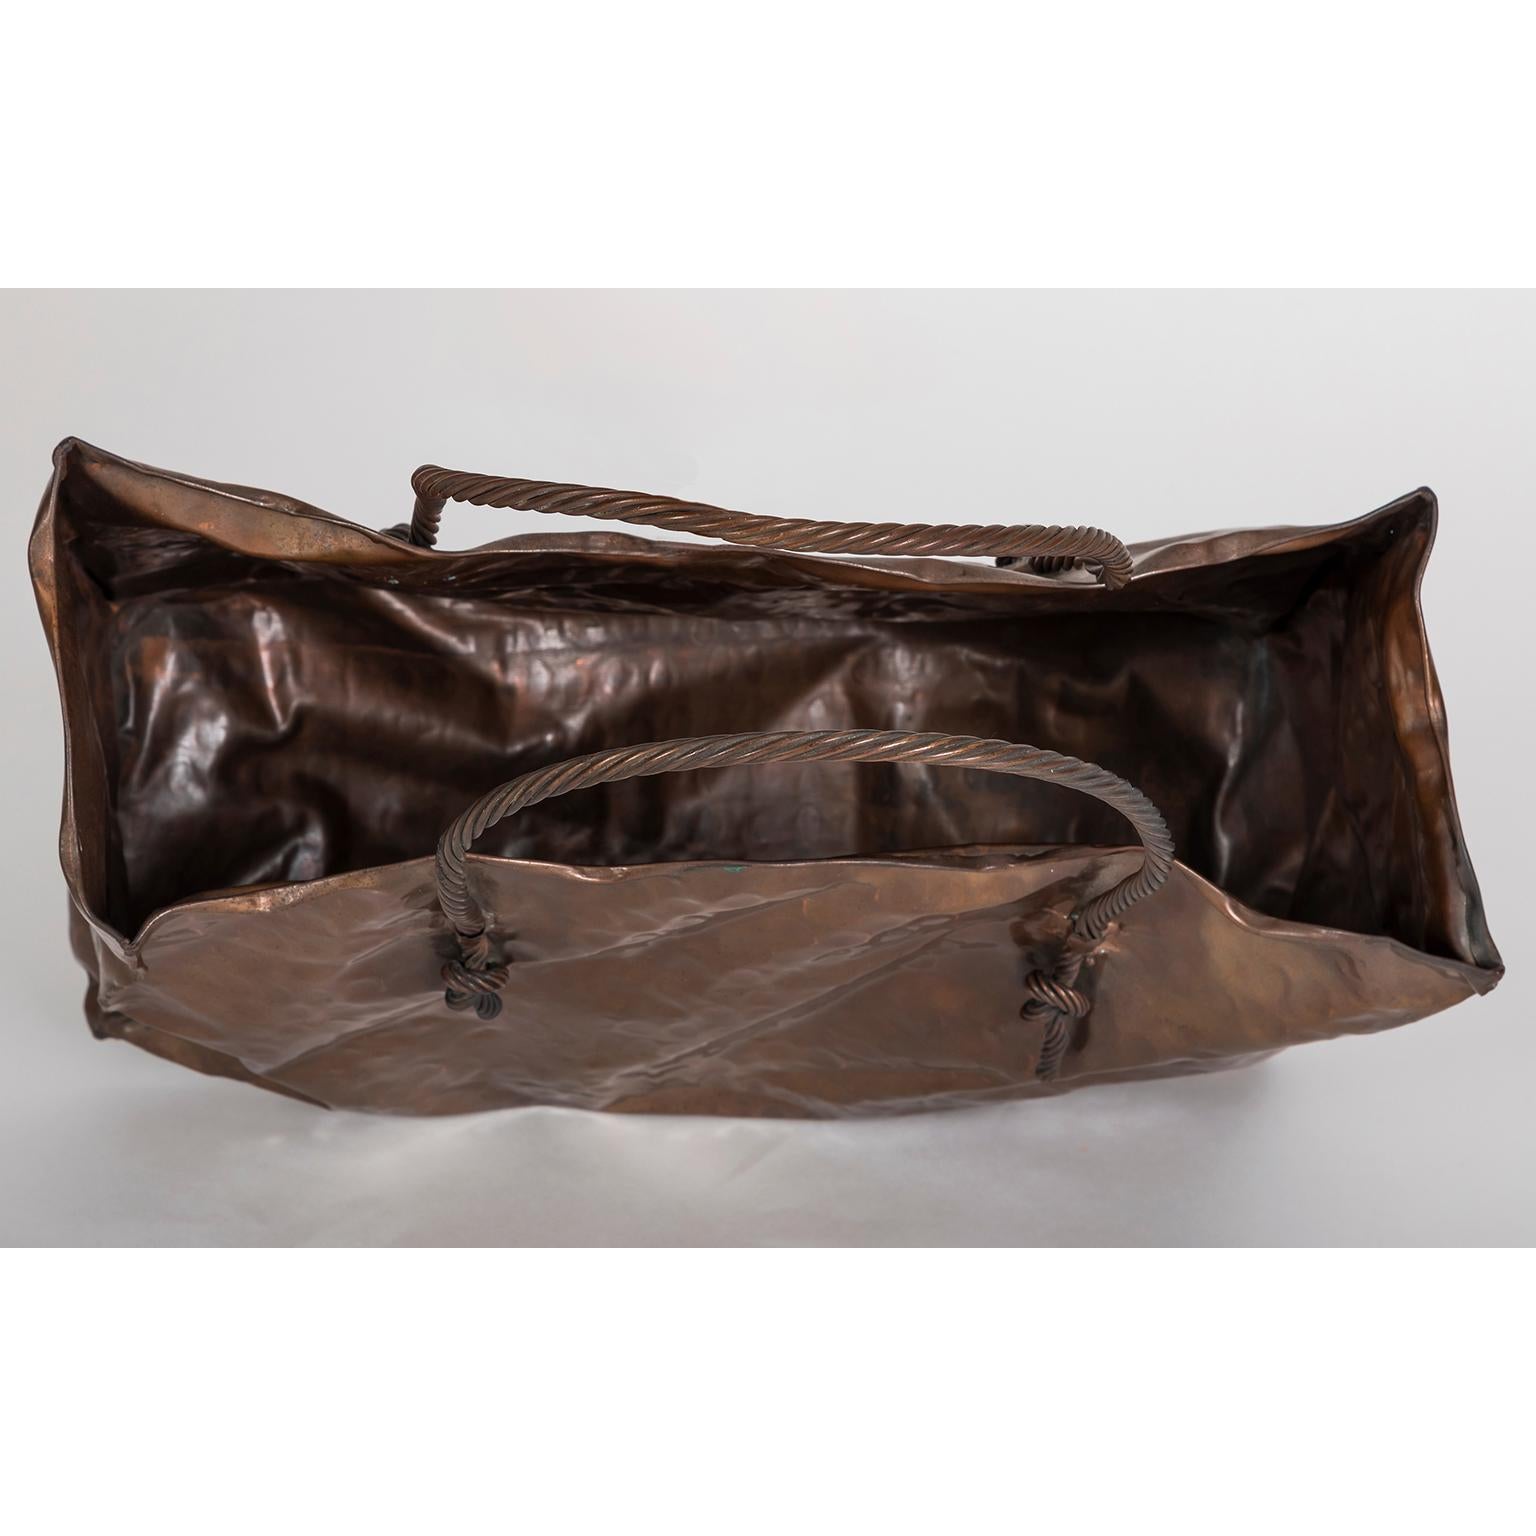 Italian Midcentury Sculpture “Shopping Bag”, in the Style of Gio Ponti For Sale 3